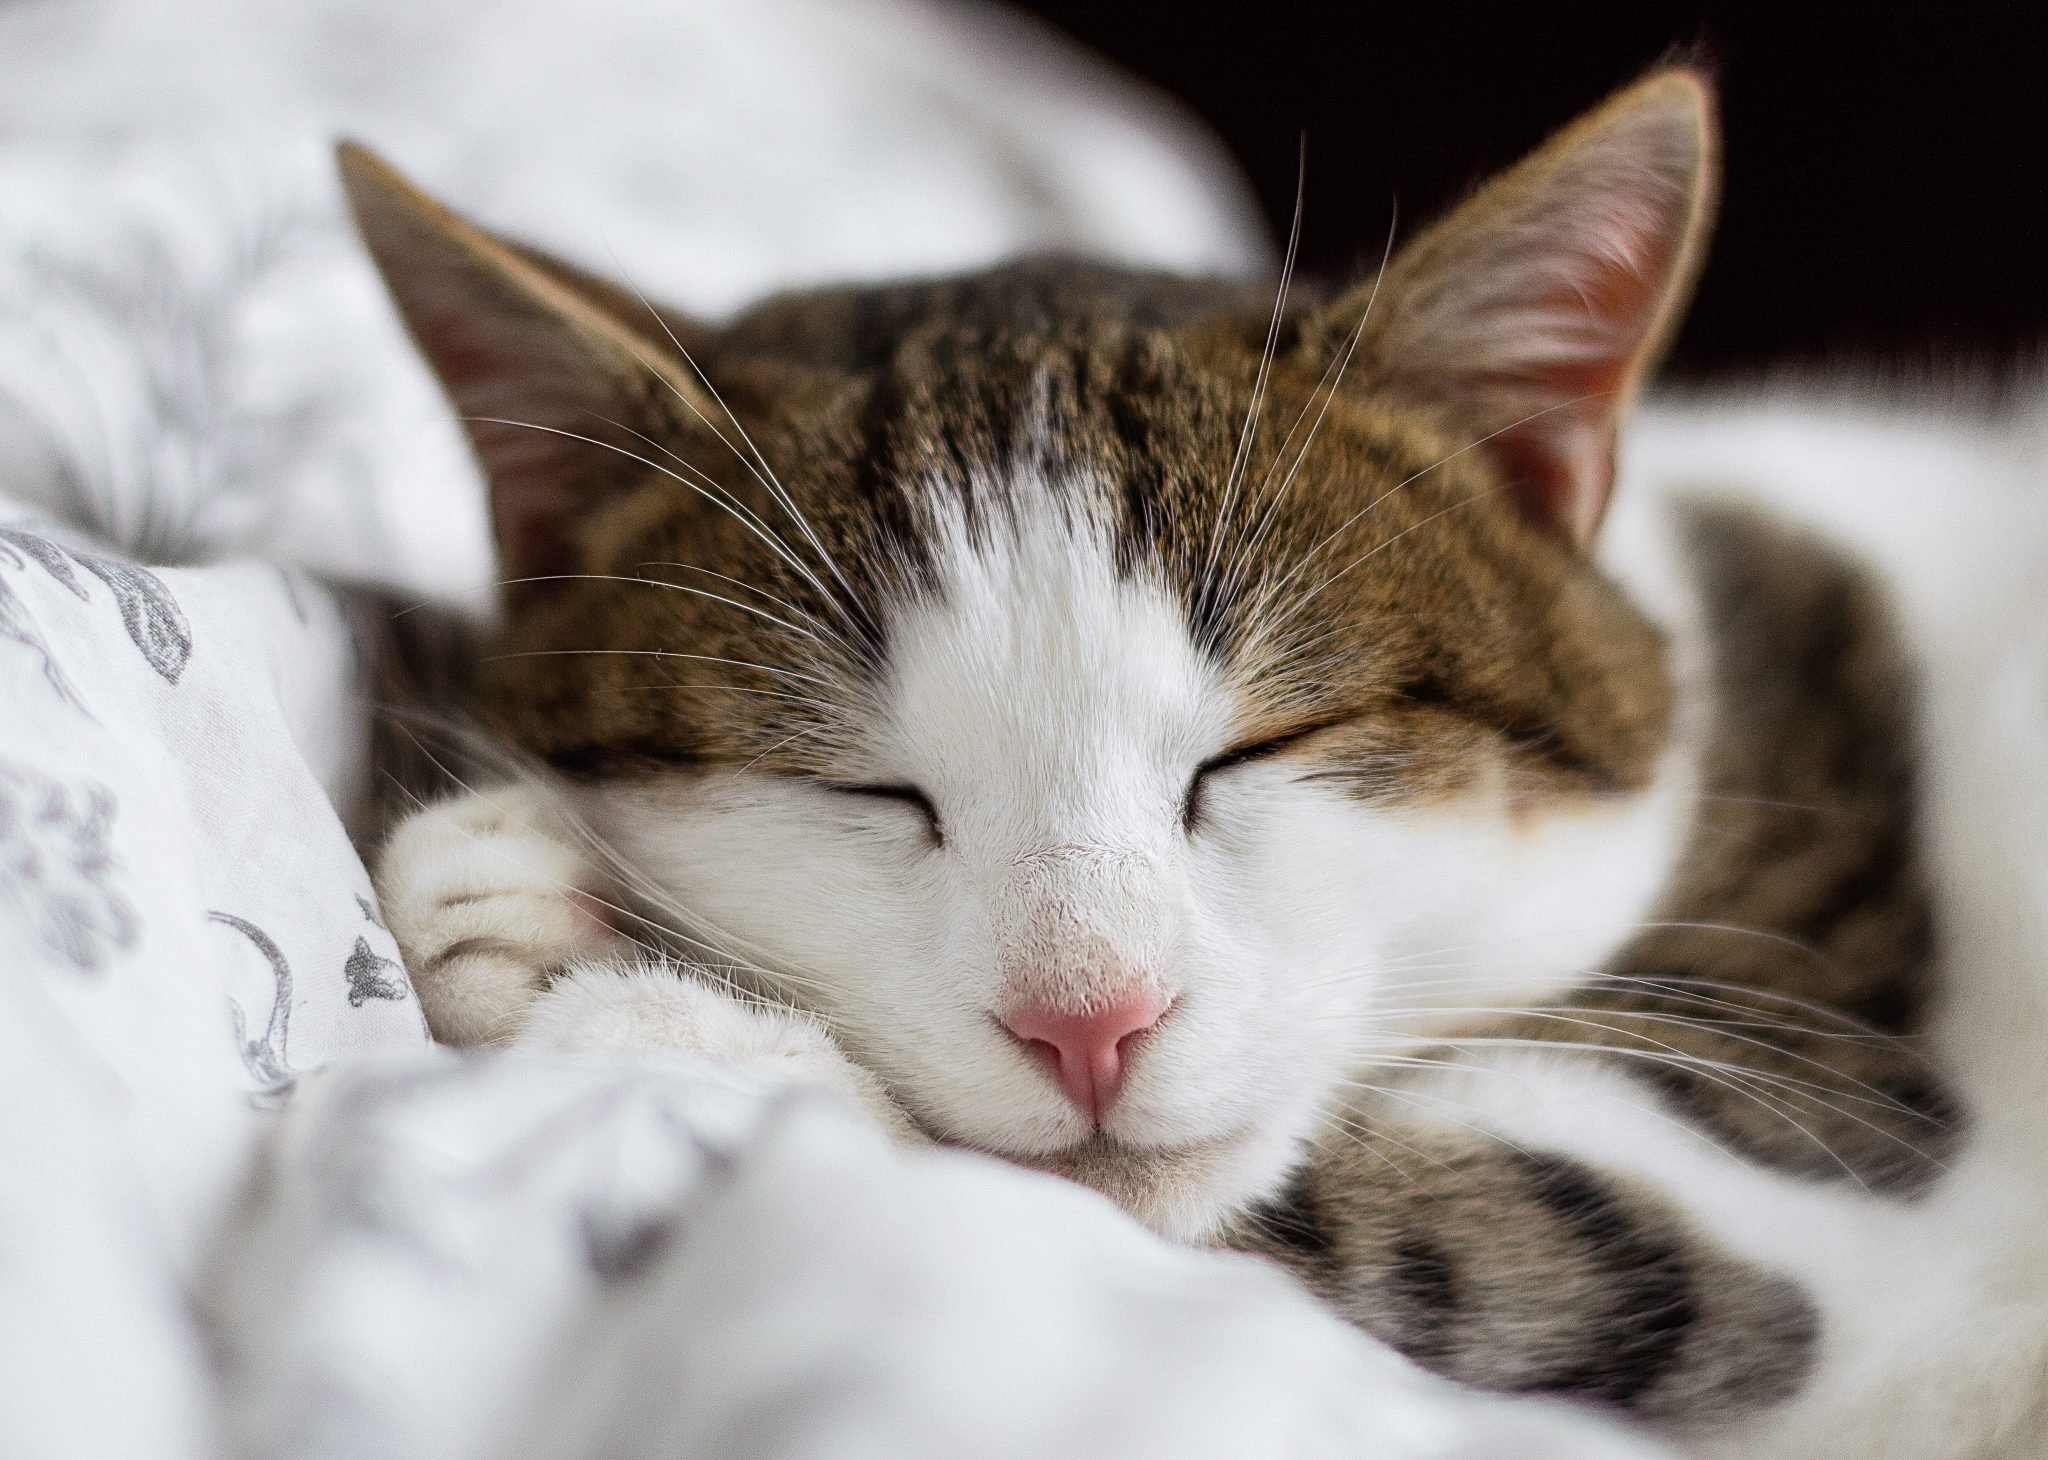 white and tabby cat asleep on white blanket, close up on face. Feature image for are essential oils harming cats?